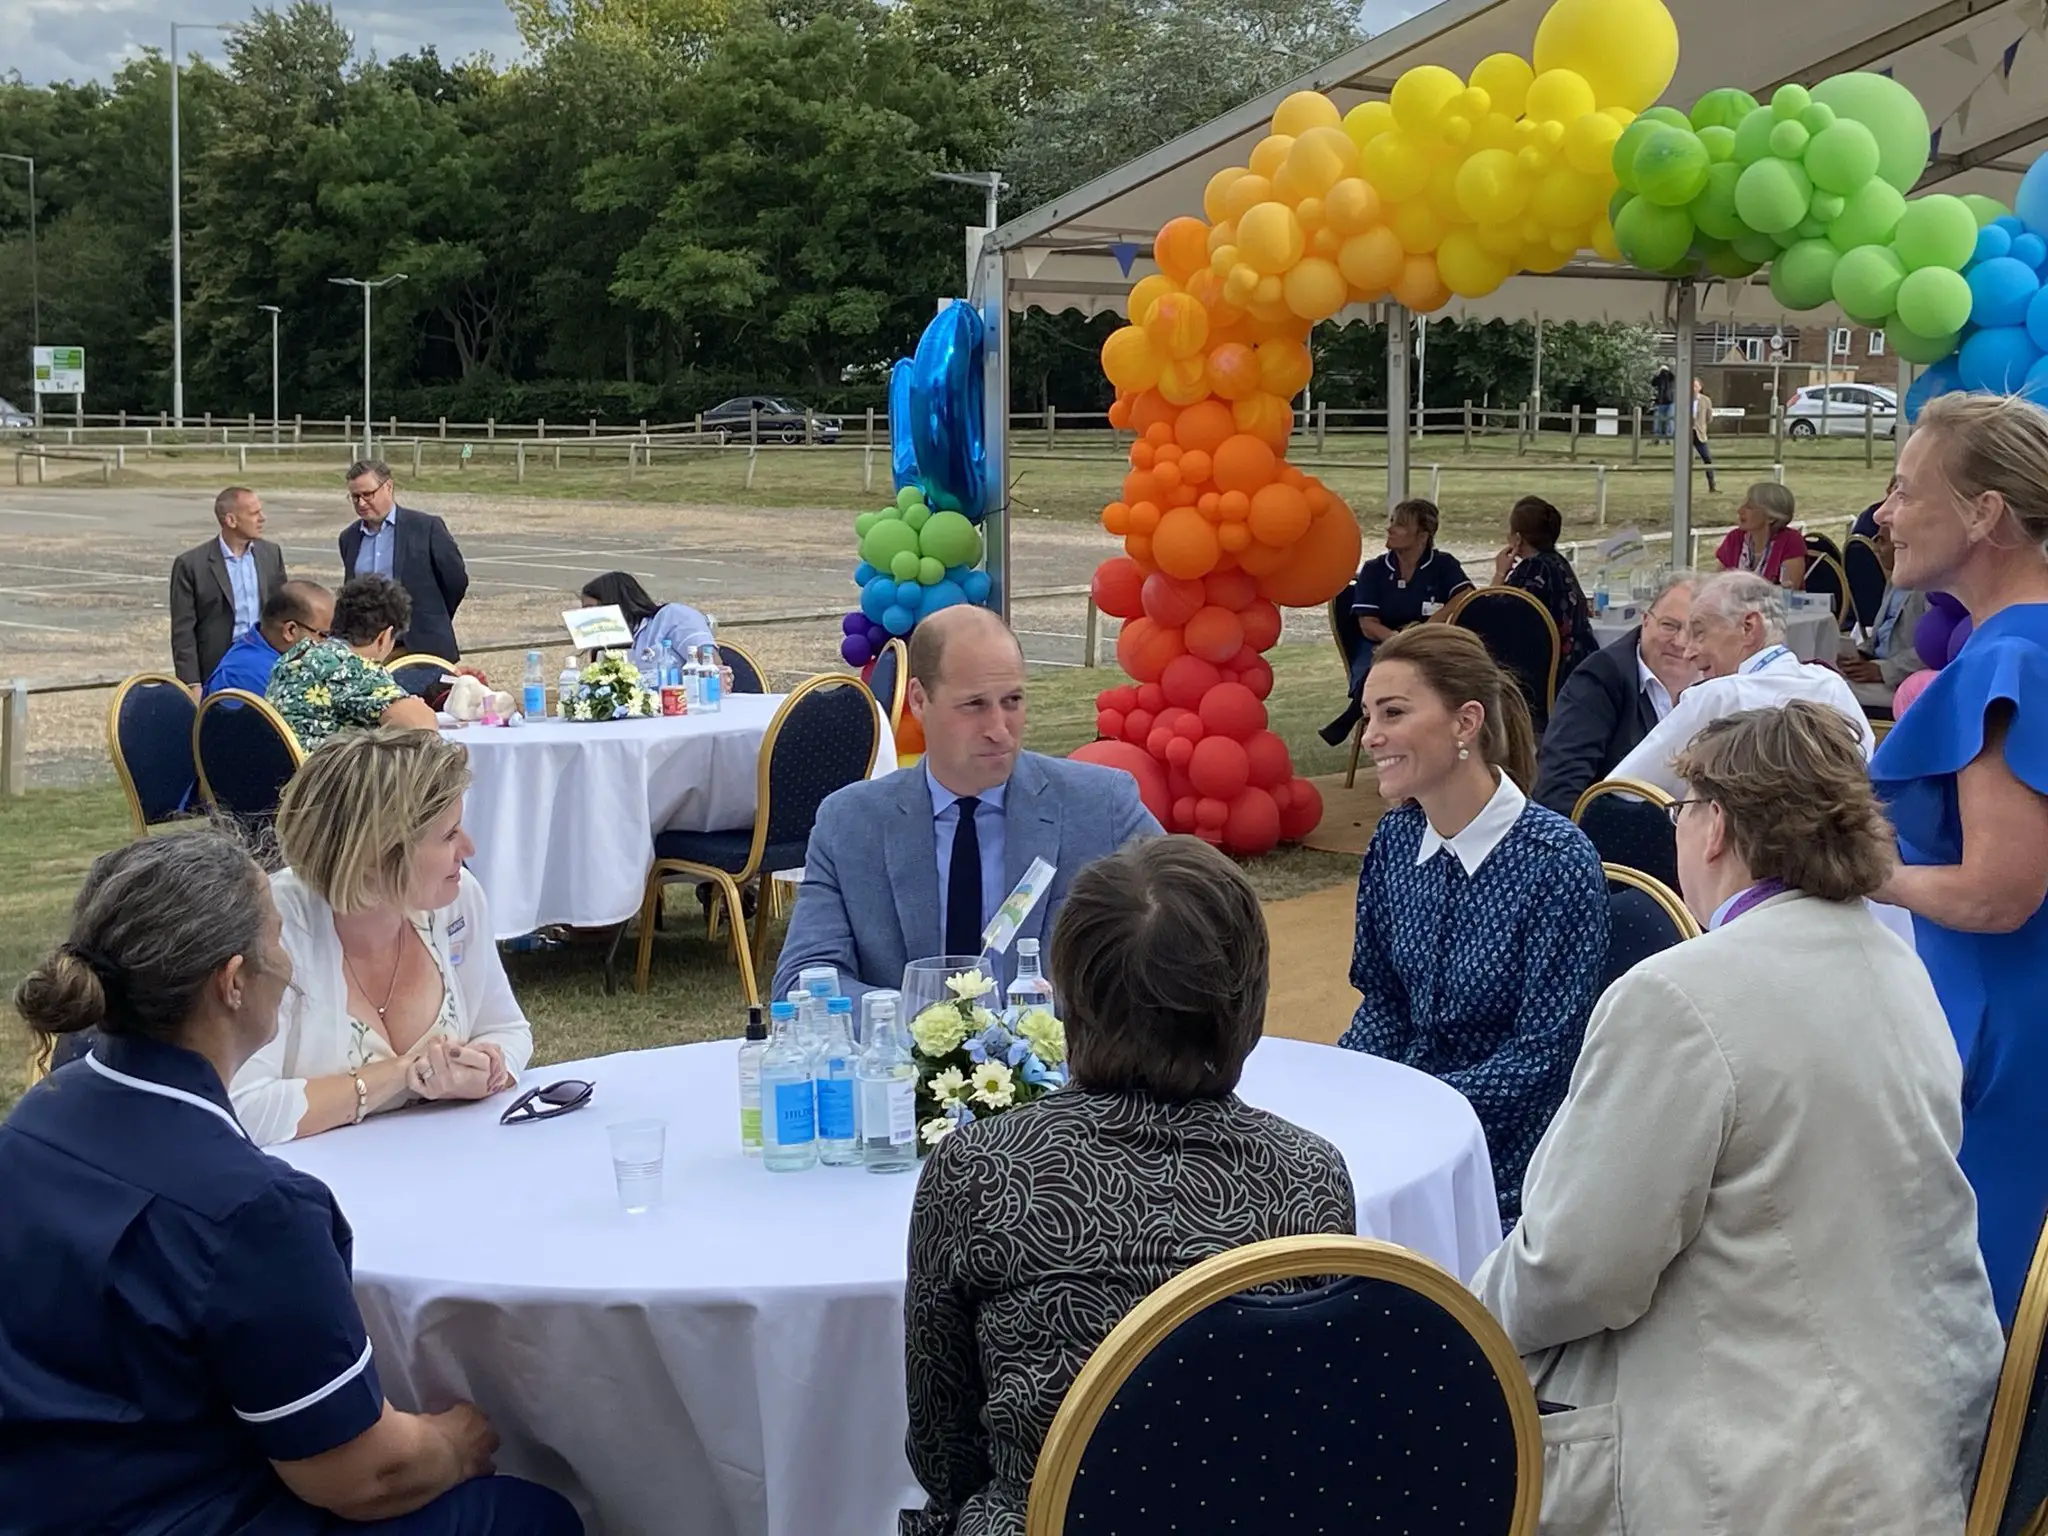 The Duke and Duchess of Cambridge met with COVID19 survivors during the tea party at NHS